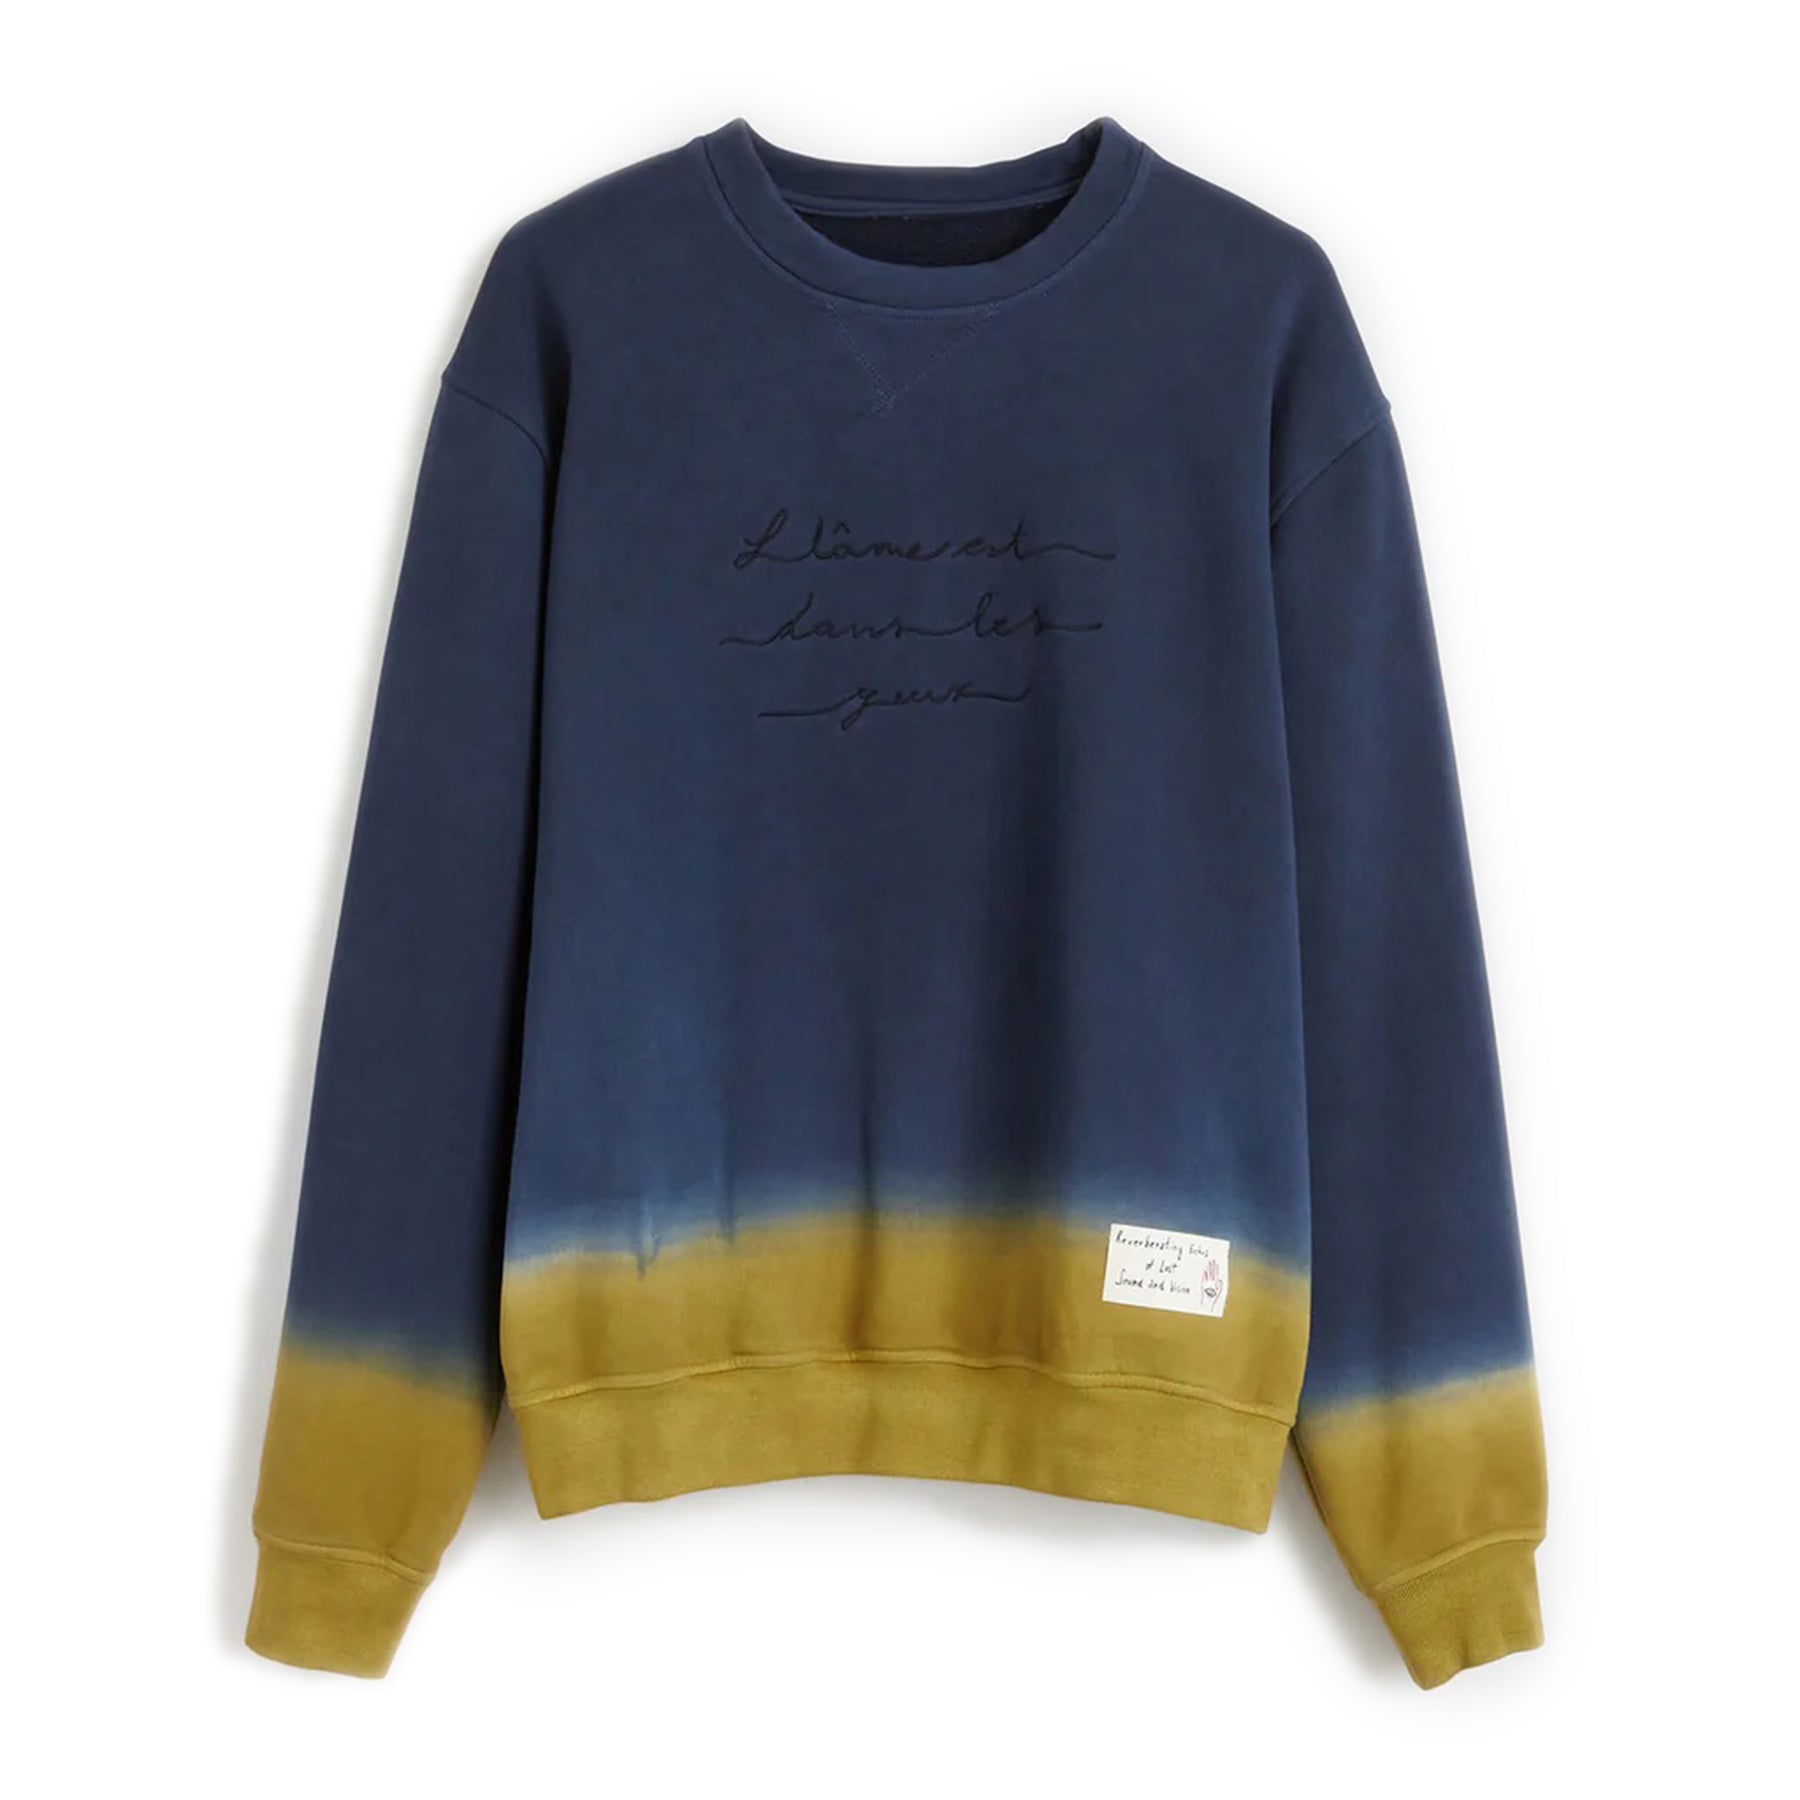 Vaco Sweatshirt  Dark blue crewneck sweatshirt Embroidery on the front Hidden message label on bottom left  Hand dyed cotton plush Composition: 100% cotton Dry clean Country of origin: Italy